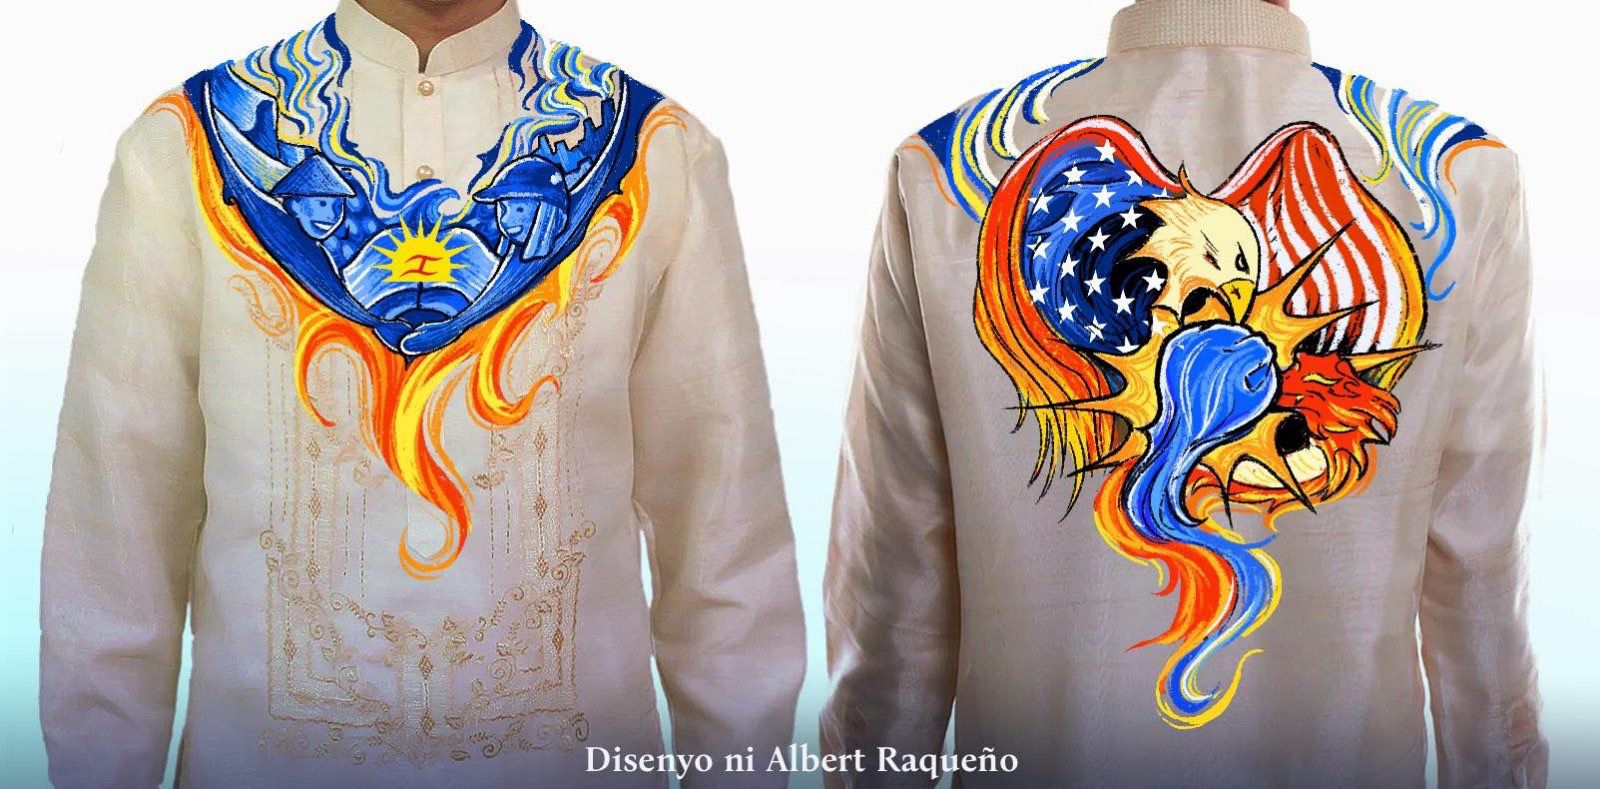 Kabataan party-list Rep. Raoul Manuel shares the design of his outfit for Marcos’ 3rd Sona